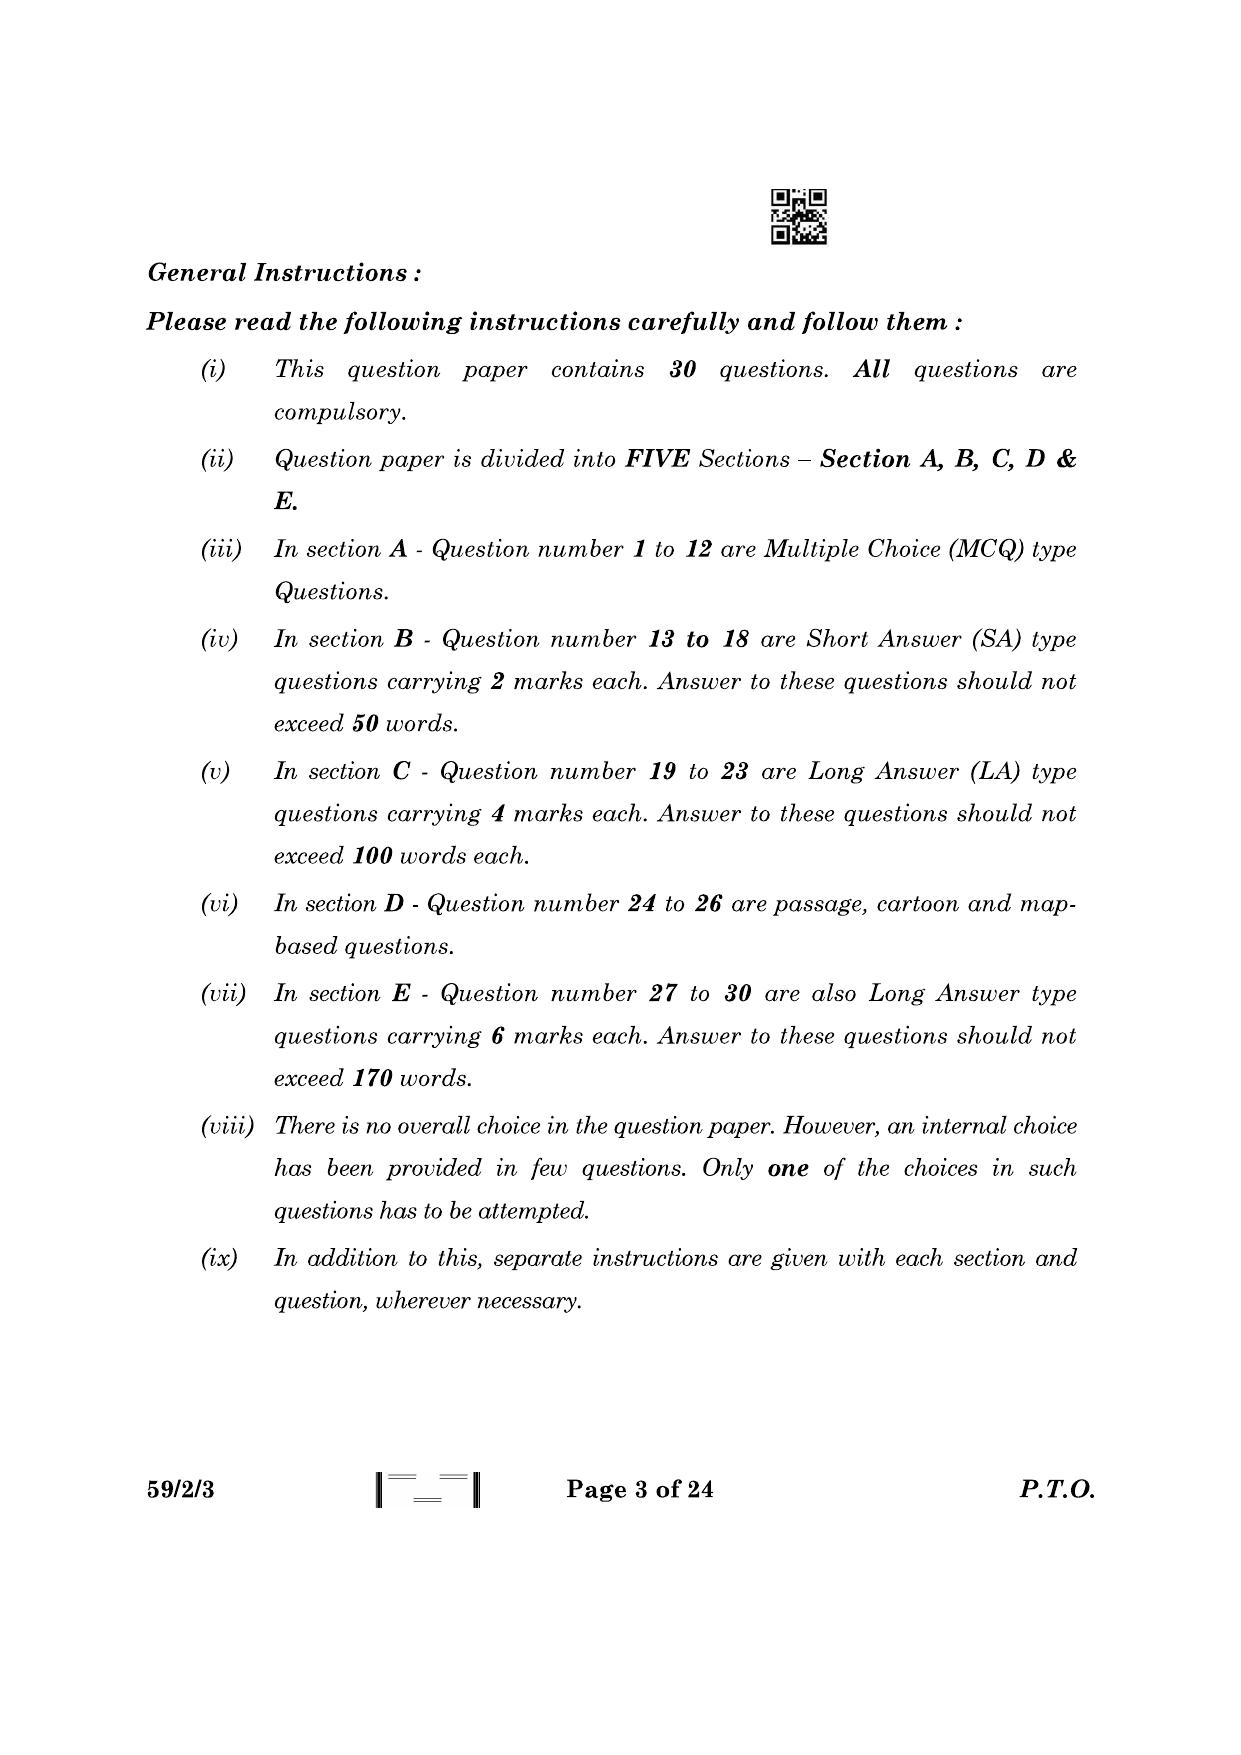 CBSE Class 12 59-2-3 Political Science 2023 Question Paper - Page 3